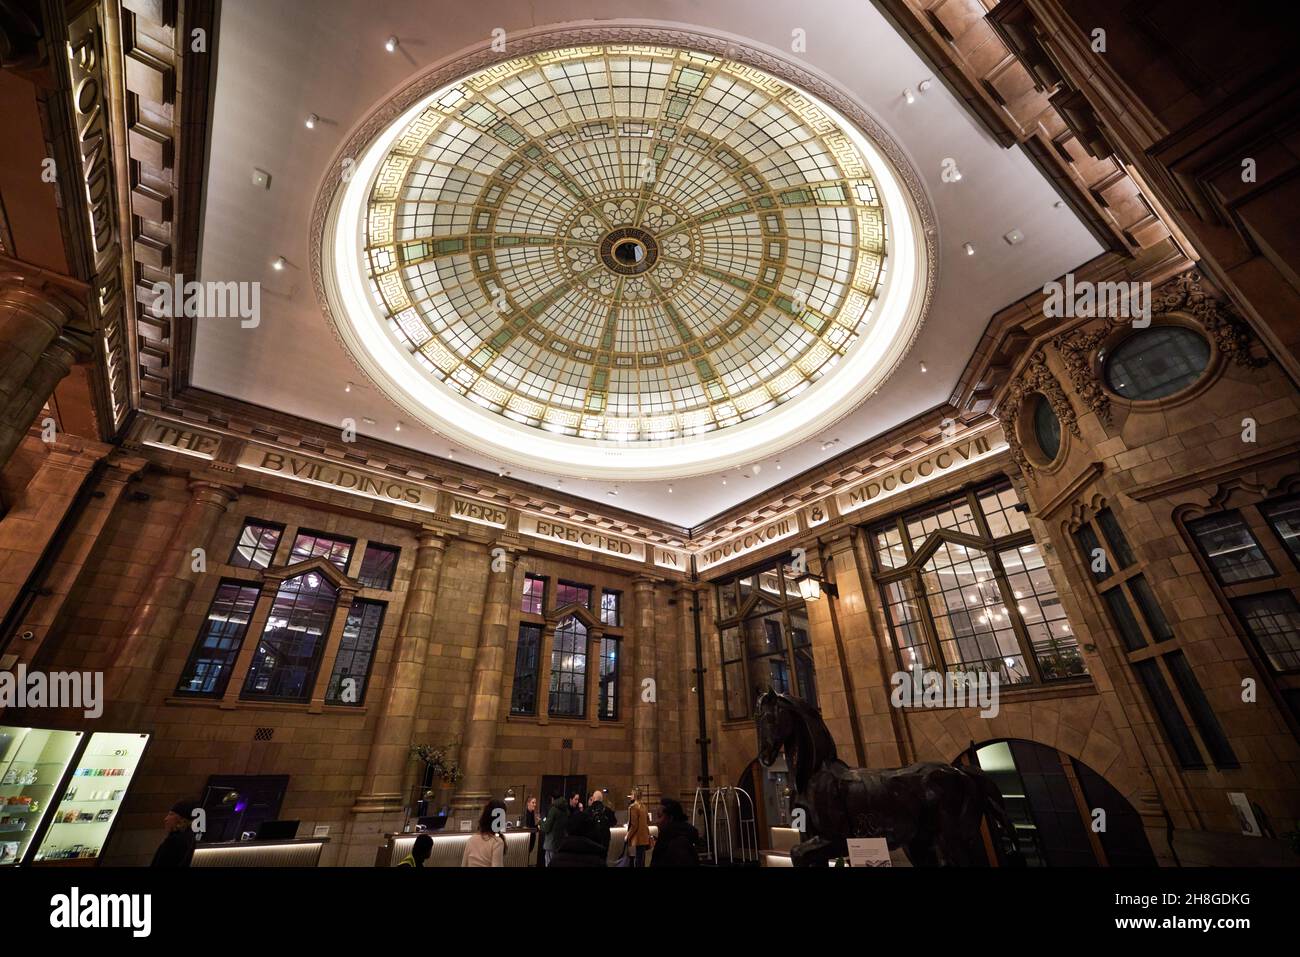 Manchester city centre Kimpton Clocktower Hotel reception lobby with large roof glass dome Stock Photo